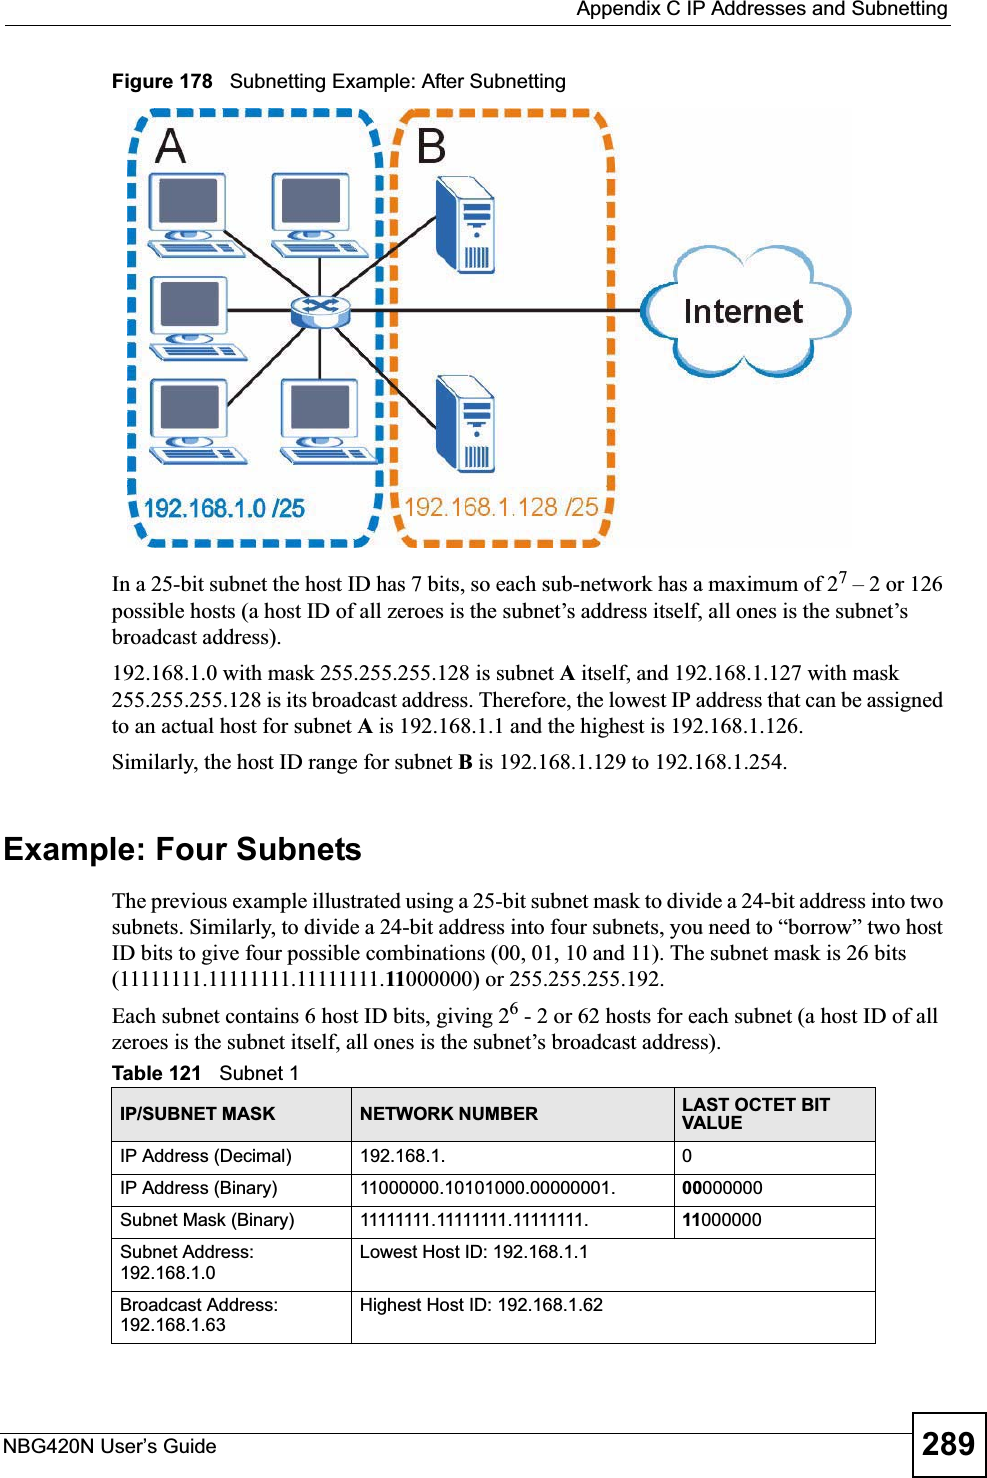  Appendix C IP Addresses and SubnettingNBG420N User’s Guide 289Figure 178   Subnetting Example: After SubnettingIn a 25-bit subnet the host ID has 7 bits, so each sub-network has a maximum of 27 – 2 or 126 possible hosts (a host ID of all zeroes is the subnet’s address itself, all ones is the subnet’s broadcast address).192.168.1.0 with mask 255.255.255.128 is subnet A itself, and 192.168.1.127 with mask 255.255.255.128 is its broadcast address. Therefore, the lowest IP address that can be assigned to an actual host for subnet A is 192.168.1.1 and the highest is 192.168.1.126. Similarly, the host ID range for subnet B is 192.168.1.129 to 192.168.1.254.Example: Four Subnets The previous example illustrated using a 25-bit subnet mask to divide a 24-bit address into two subnets. Similarly, to divide a 24-bit address into four subnets, you need to “borrow” two host ID bits to give four possible combinations (00, 01, 10 and 11). The subnet mask is 26 bits (11111111.11111111.11111111.11000000) or 255.255.255.192. Each subnet contains 6 host ID bits, giving 26 - 2 or 62 hosts for each subnet (a host ID of all zeroes is the subnet itself, all ones is the subnet’s broadcast address). Table 121   Subnet 1IP/SUBNET MASK NETWORK NUMBER LAST OCTET BIT VALUEIP Address (Decimal) 192.168.1. 0IP Address (Binary) 11000000.10101000.00000001. 00000000Subnet Mask (Binary) 11111111.11111111.11111111. 11000000Subnet Address: 192.168.1.0Lowest Host ID: 192.168.1.1Broadcast Address: 192.168.1.63Highest Host ID: 192.168.1.62